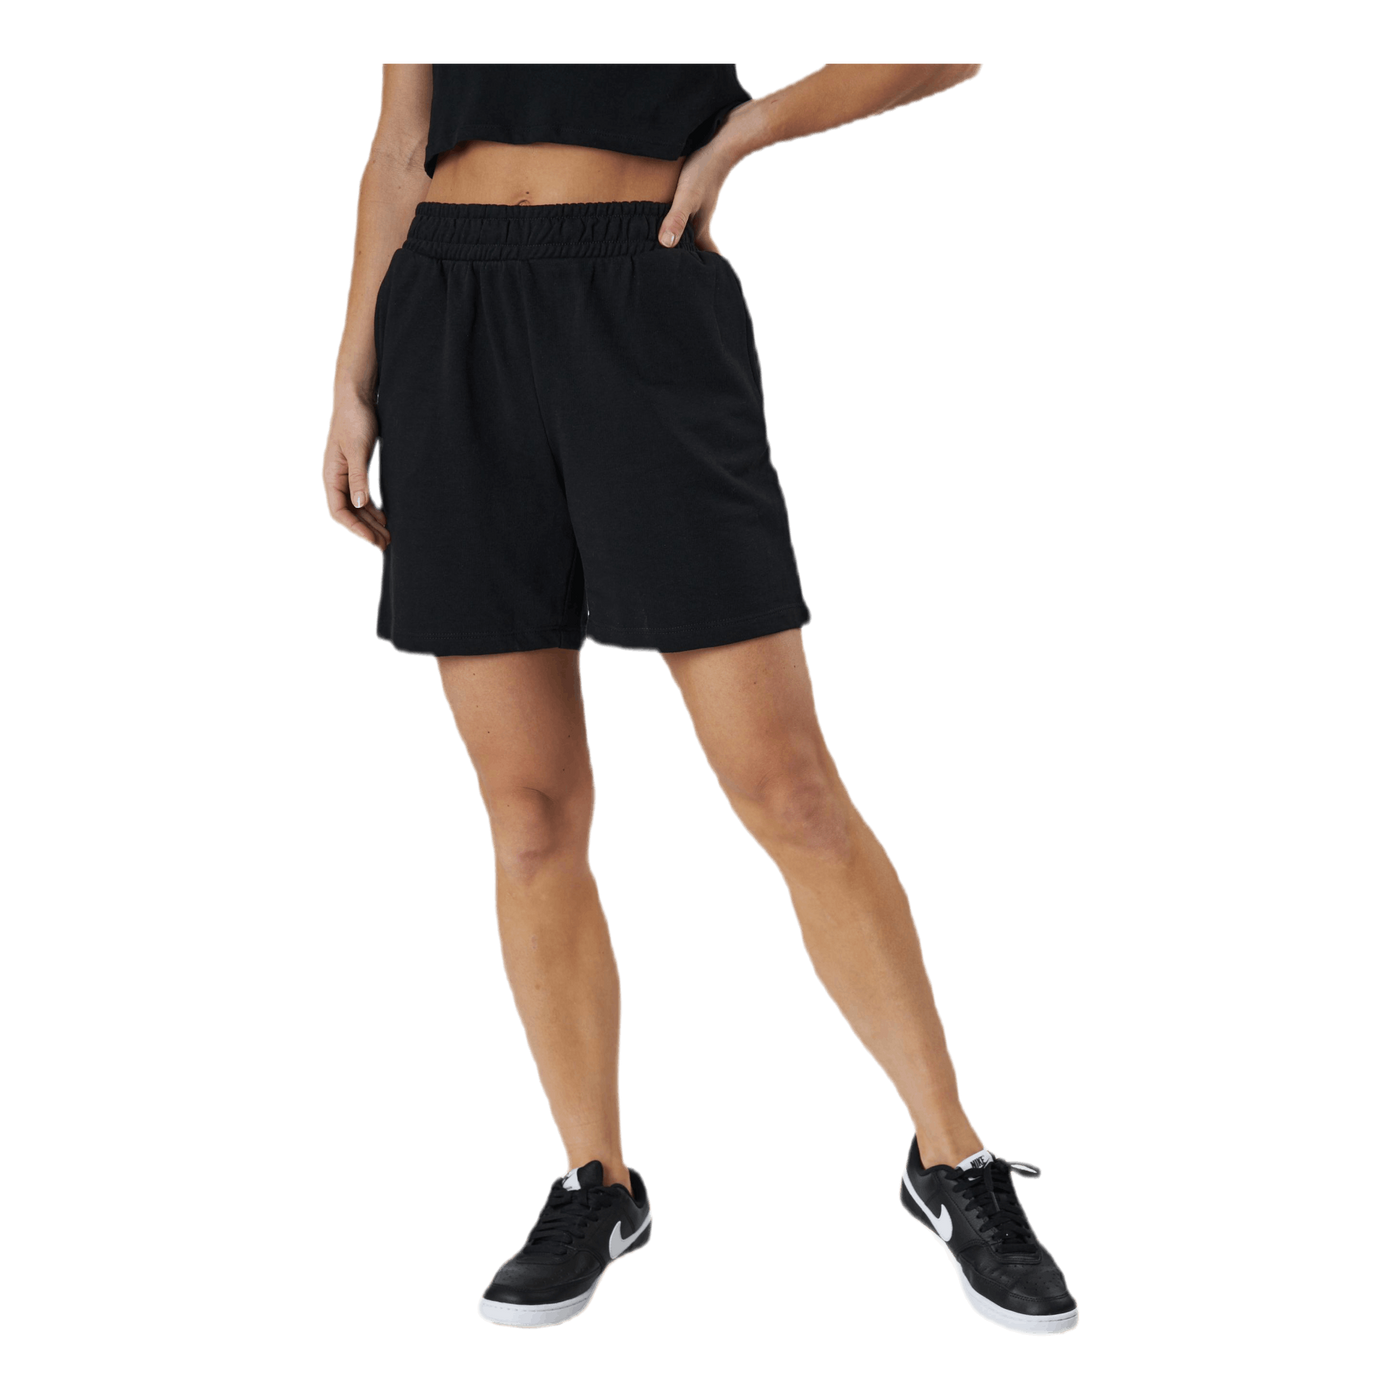 Issi Life Shorts Swt Black